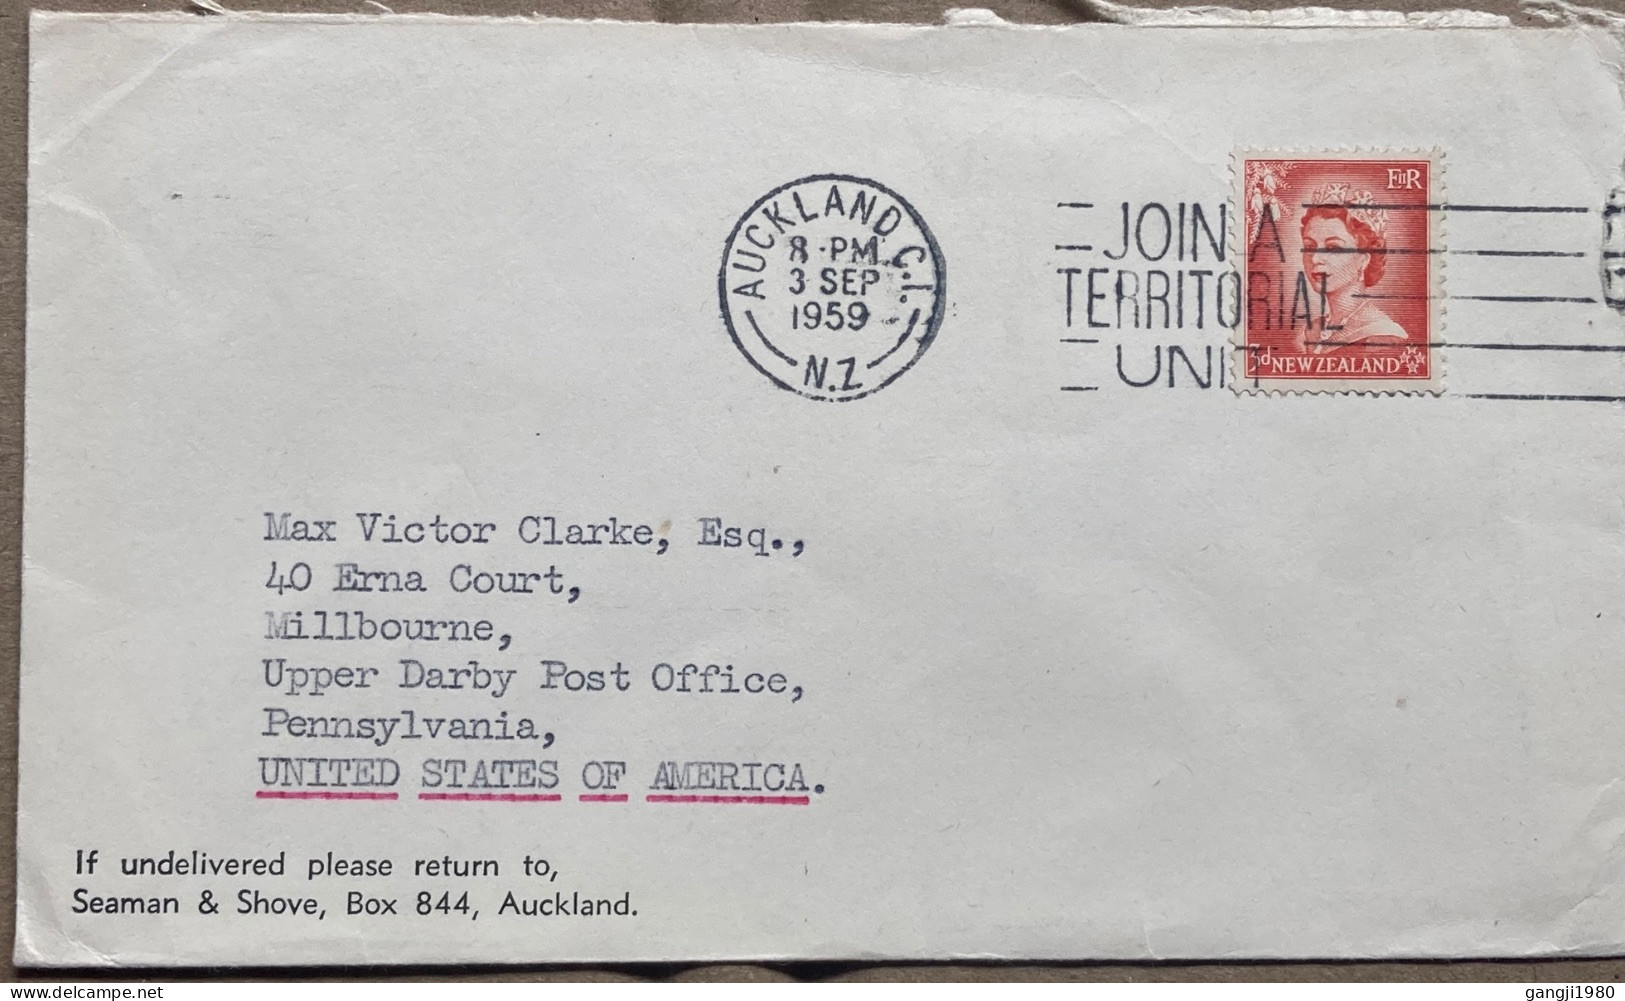 NEW ZEALAND 1959, COVER USED TO USA, FIRM SEAMAN & SHOVE, AUCKLAND CITY SLOGAN CANCEL, JOIN A TERRITORIAL UNIT, QUEEN ST - Storia Postale